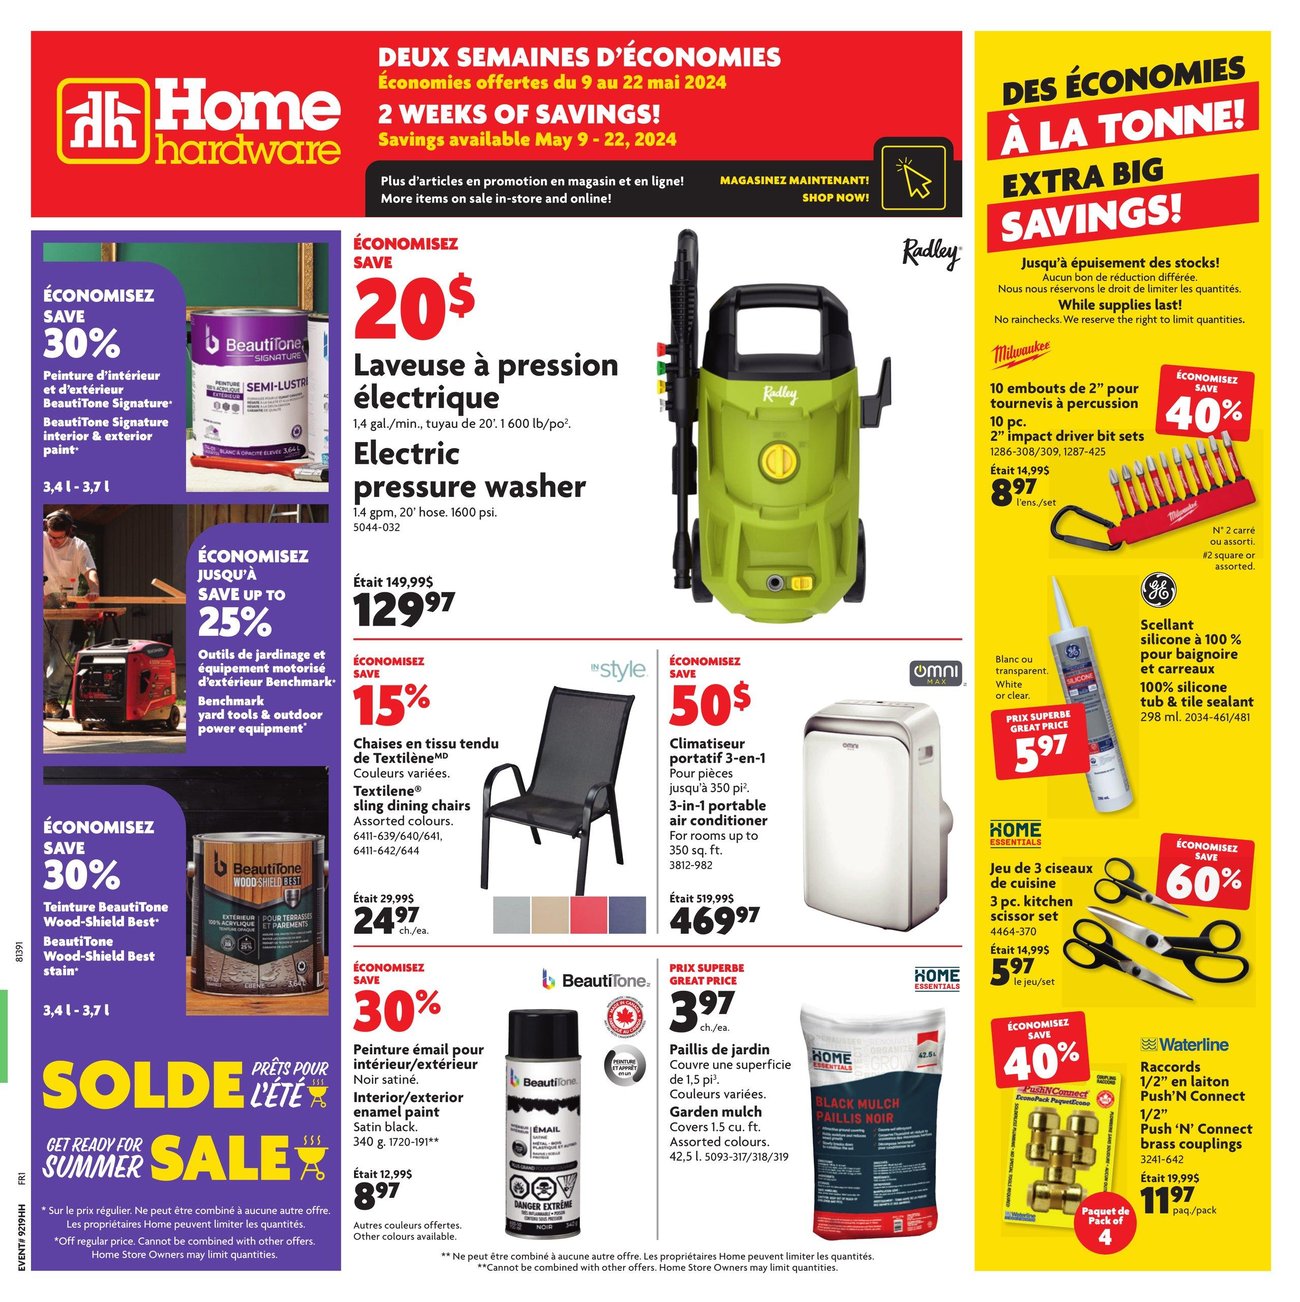 Home Hardware - Quebec - 2 Weeks of Savings - Page 1